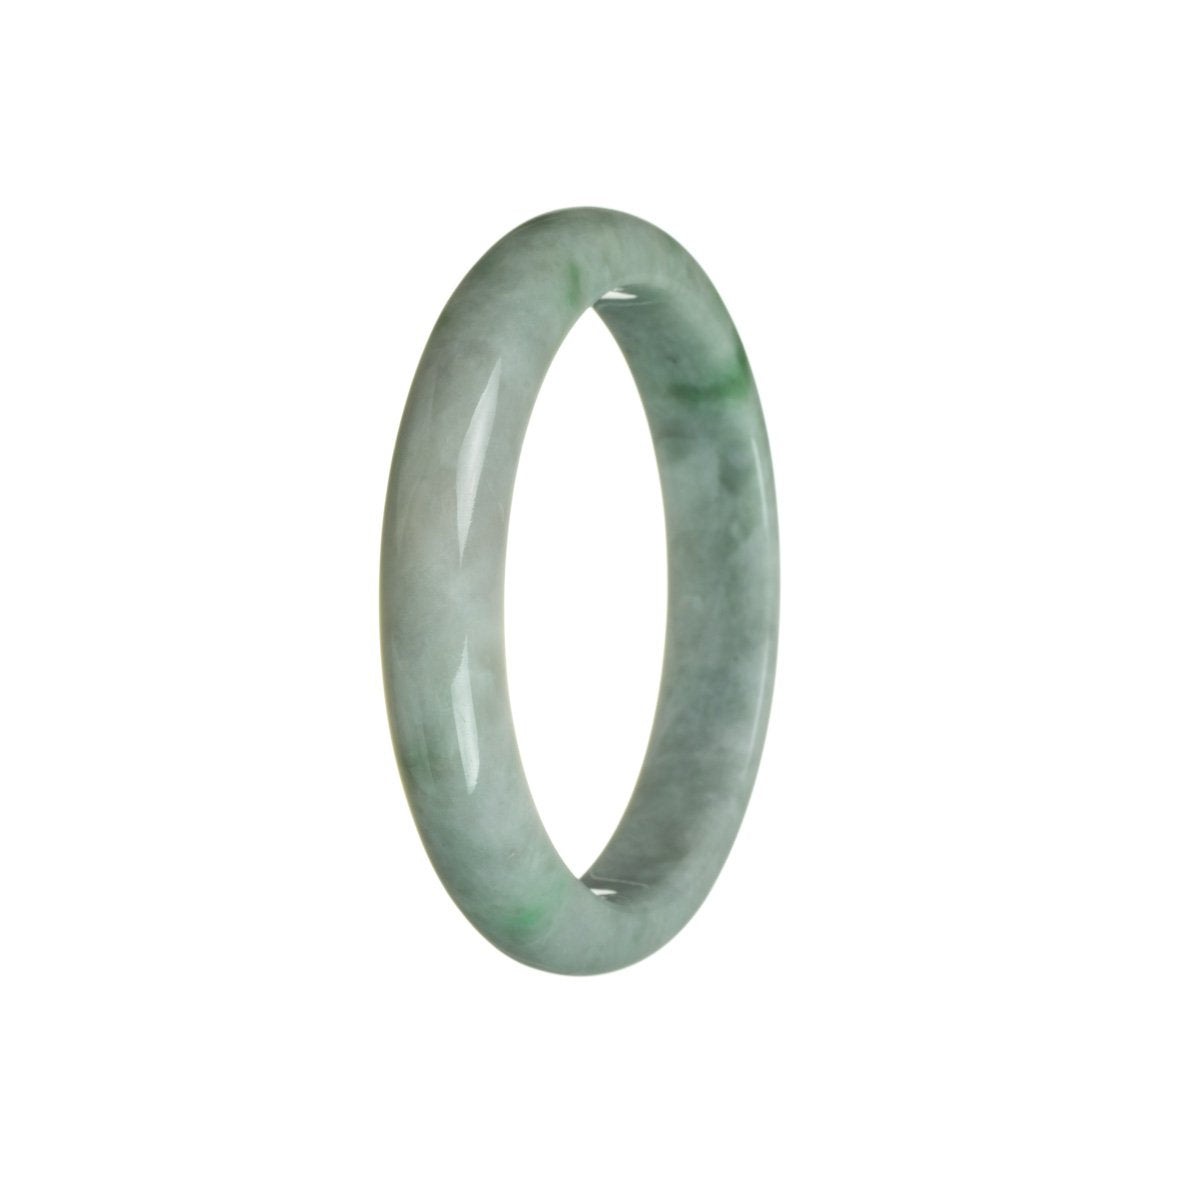 A close-up photo of a half-moon shaped bangle made of untreated grey with green Burma jade. The bangle is certified and measures 57mm in diameter. The jade has a smooth and polished surface, showcasing its natural beauty.